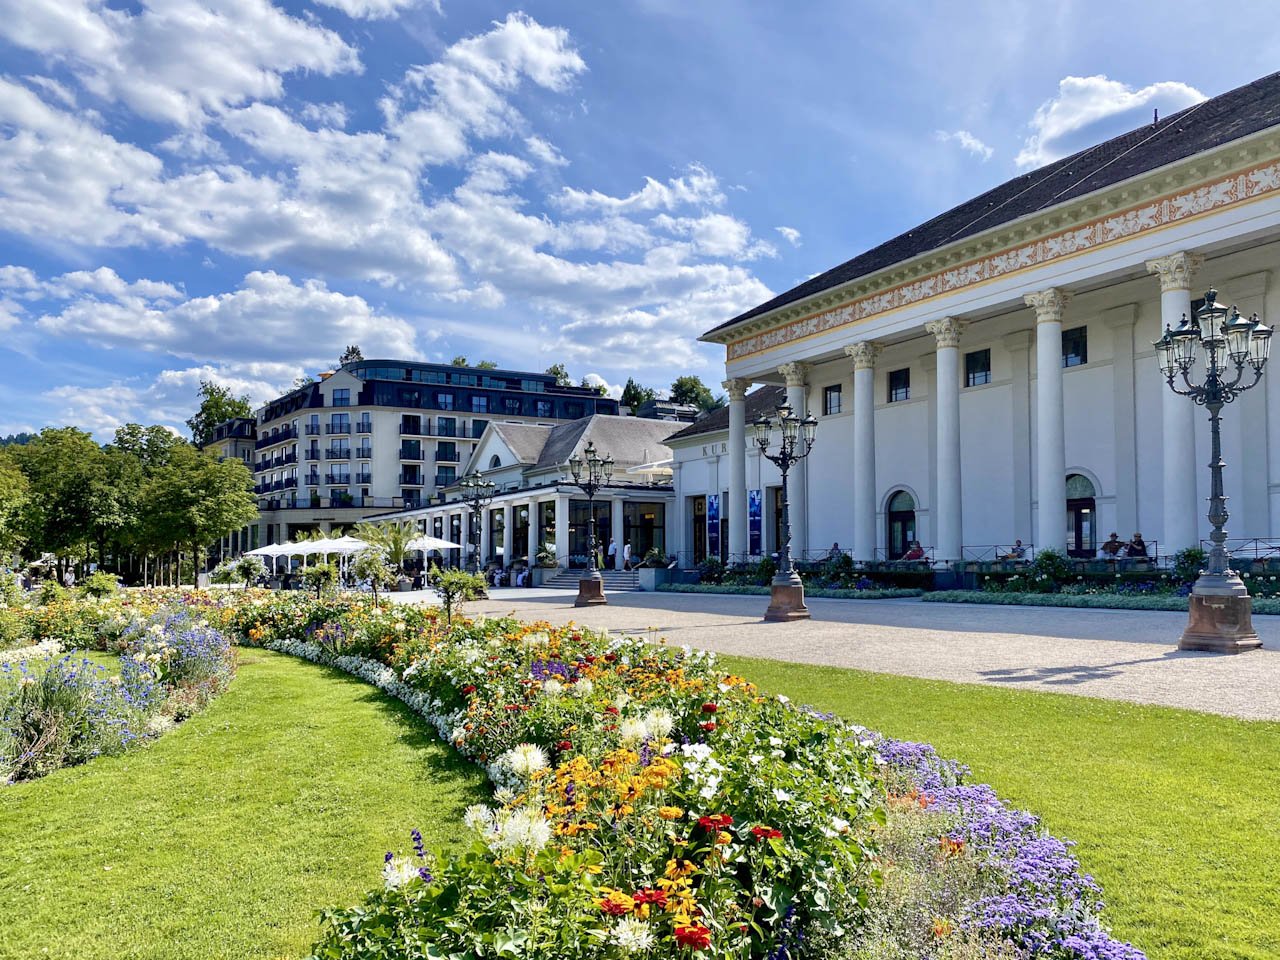 Kurhaus behind a richly planted flower bed with blue sky